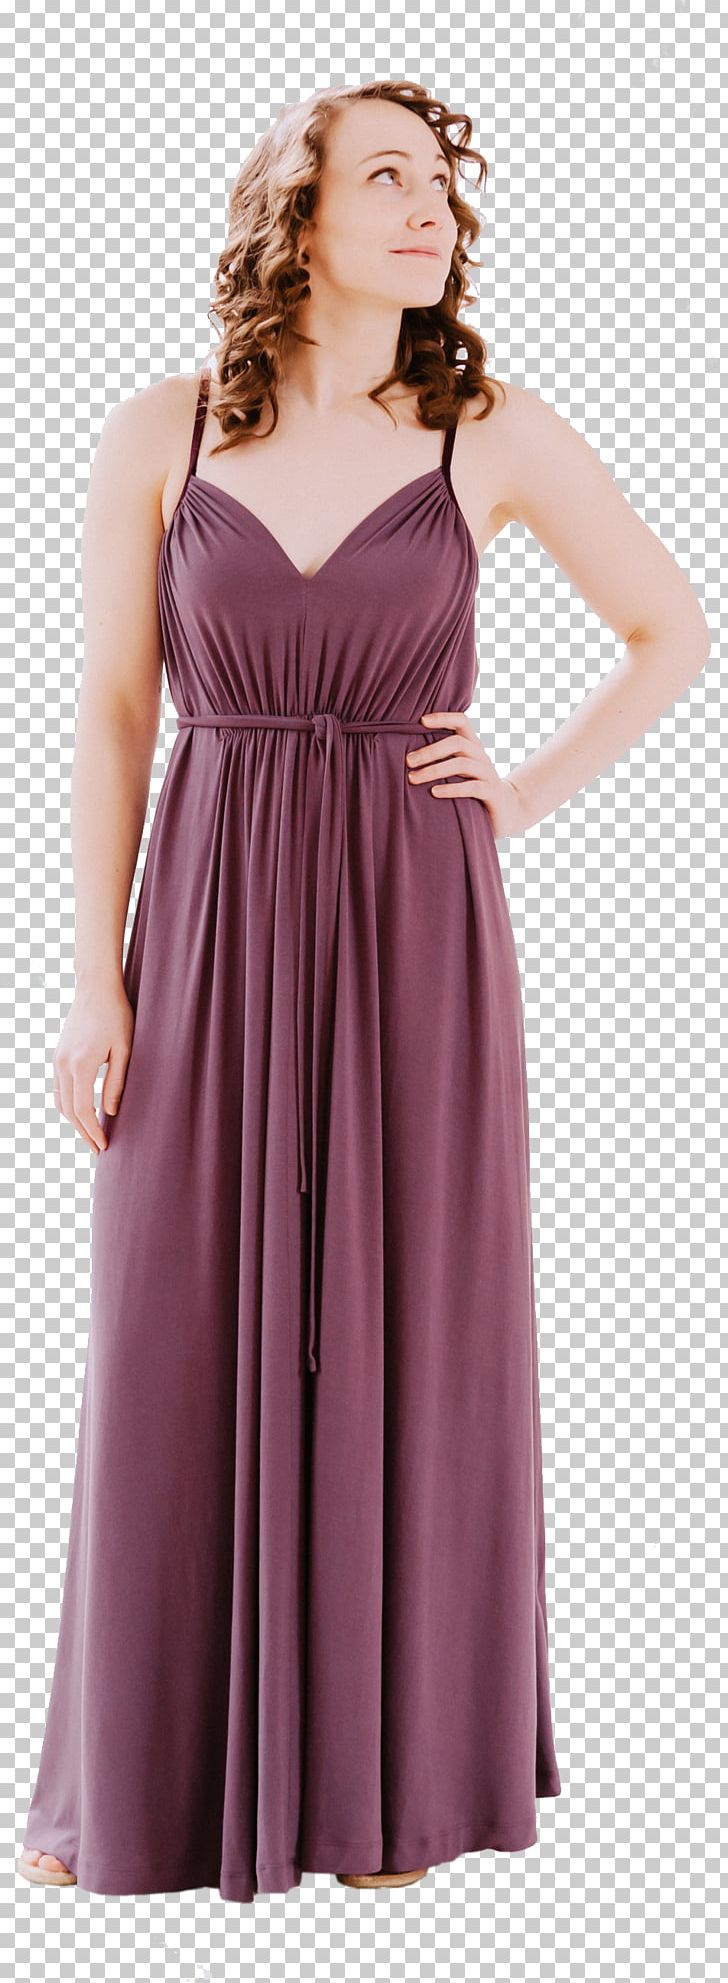 Wedding Dress Ball Gown Formal Wear Bridesmaid Dress PNG, Clipart, Ball, Ball Gown, Bridal Party Dress, Bridesmaid Dress, Clothing Free PNG Download